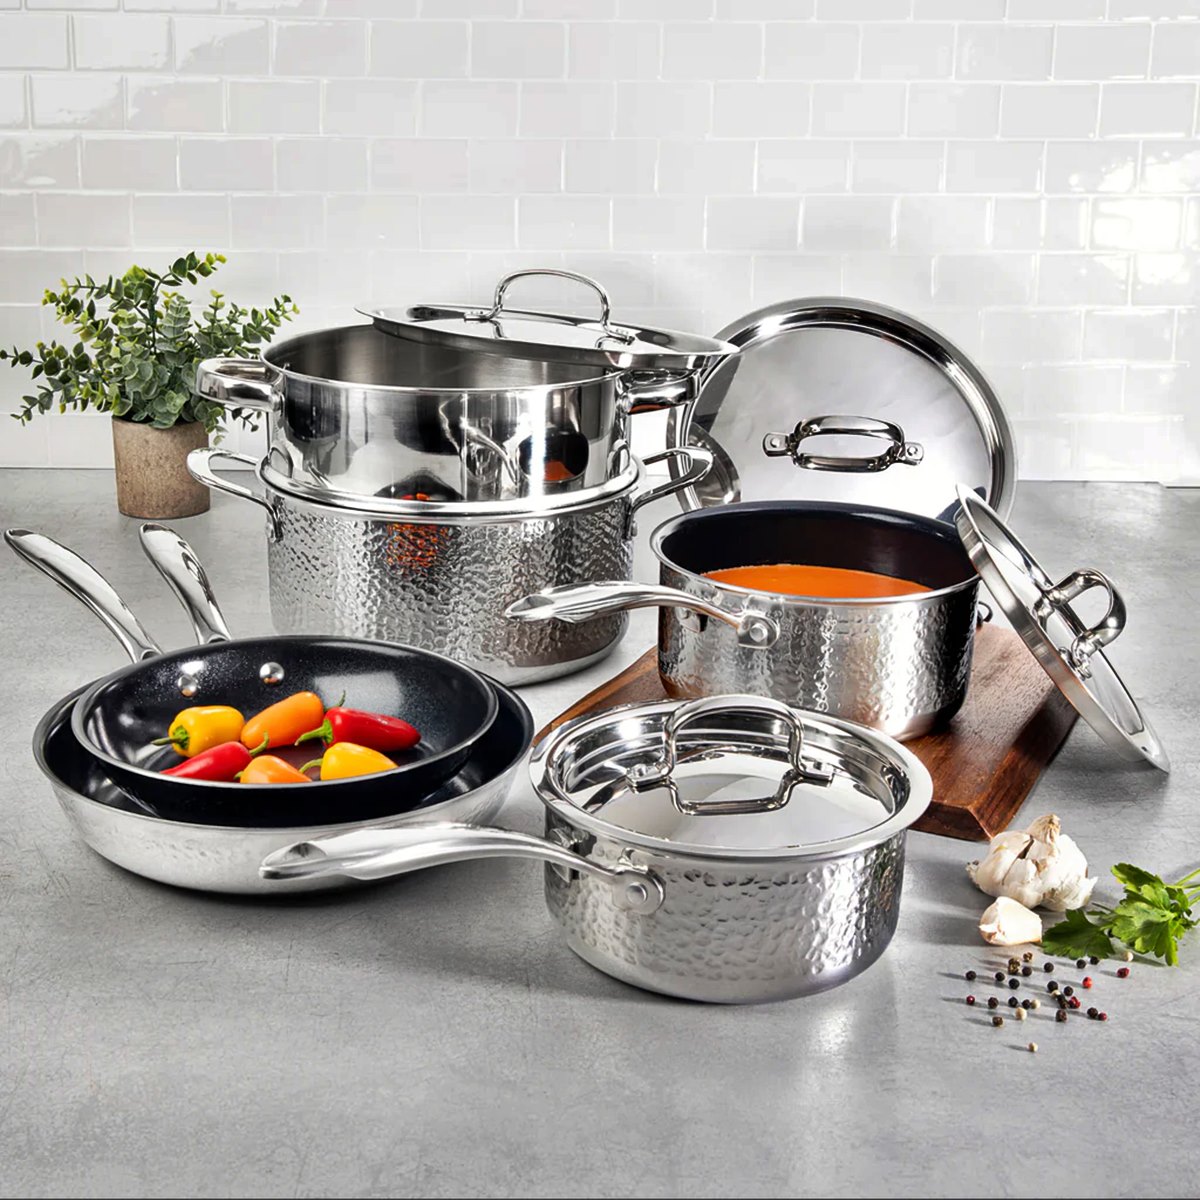 9 Amazing Cookware Sets On Sale Clearance for 2023